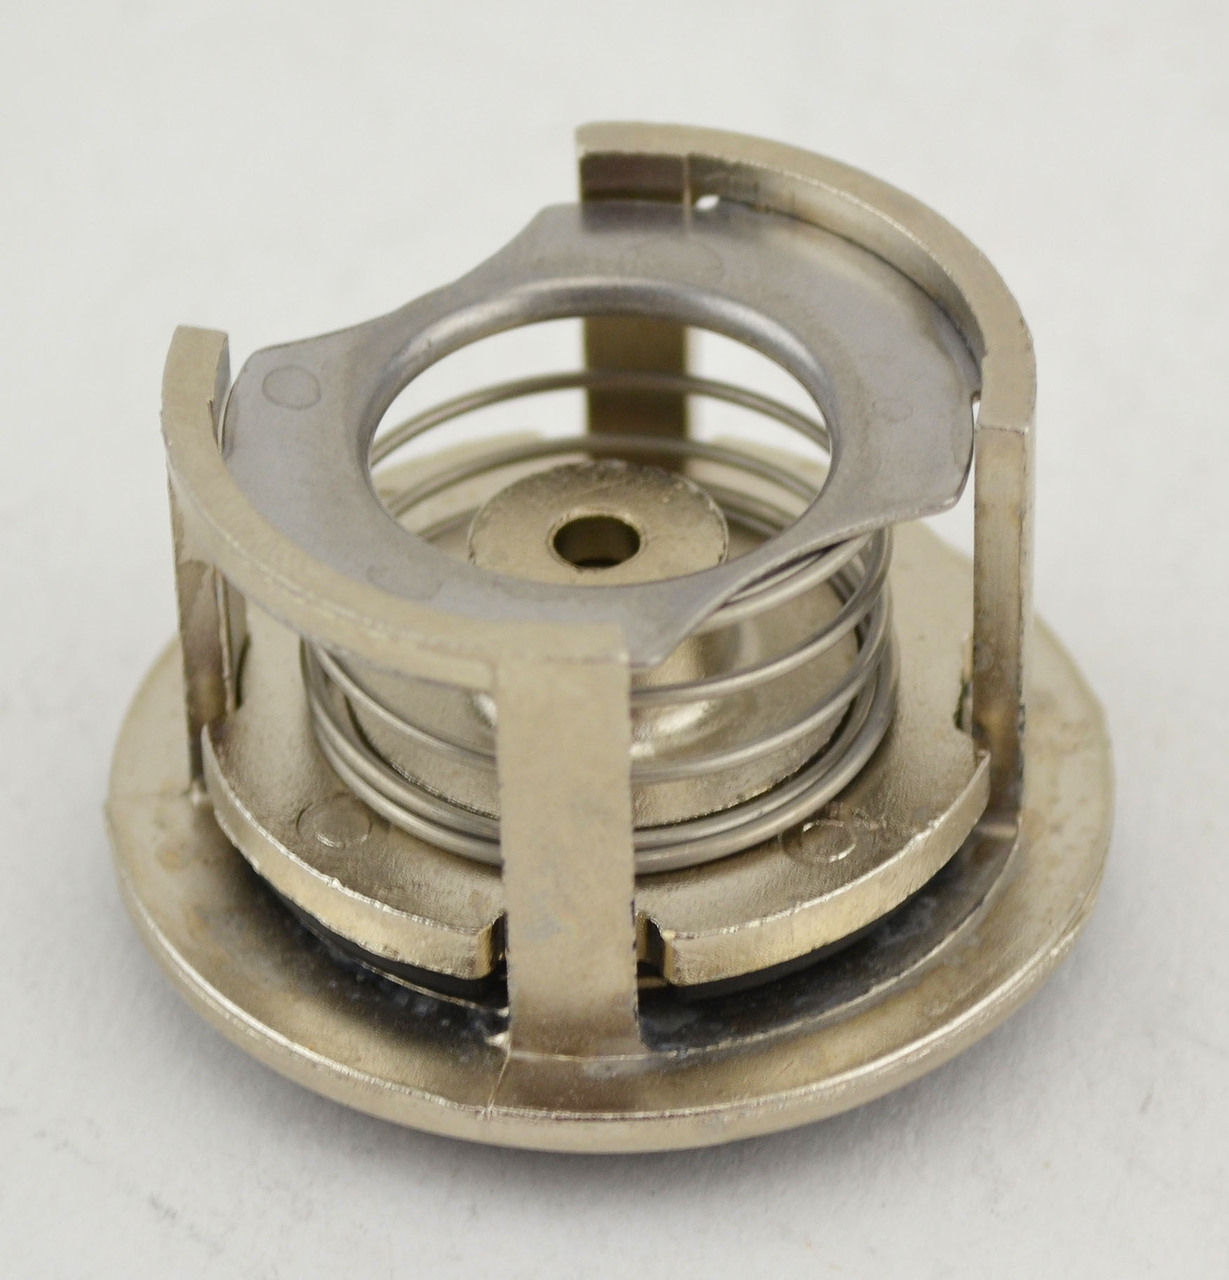 METER CHECK VALVE ASSEMBLY, Fits Gilbarco Image